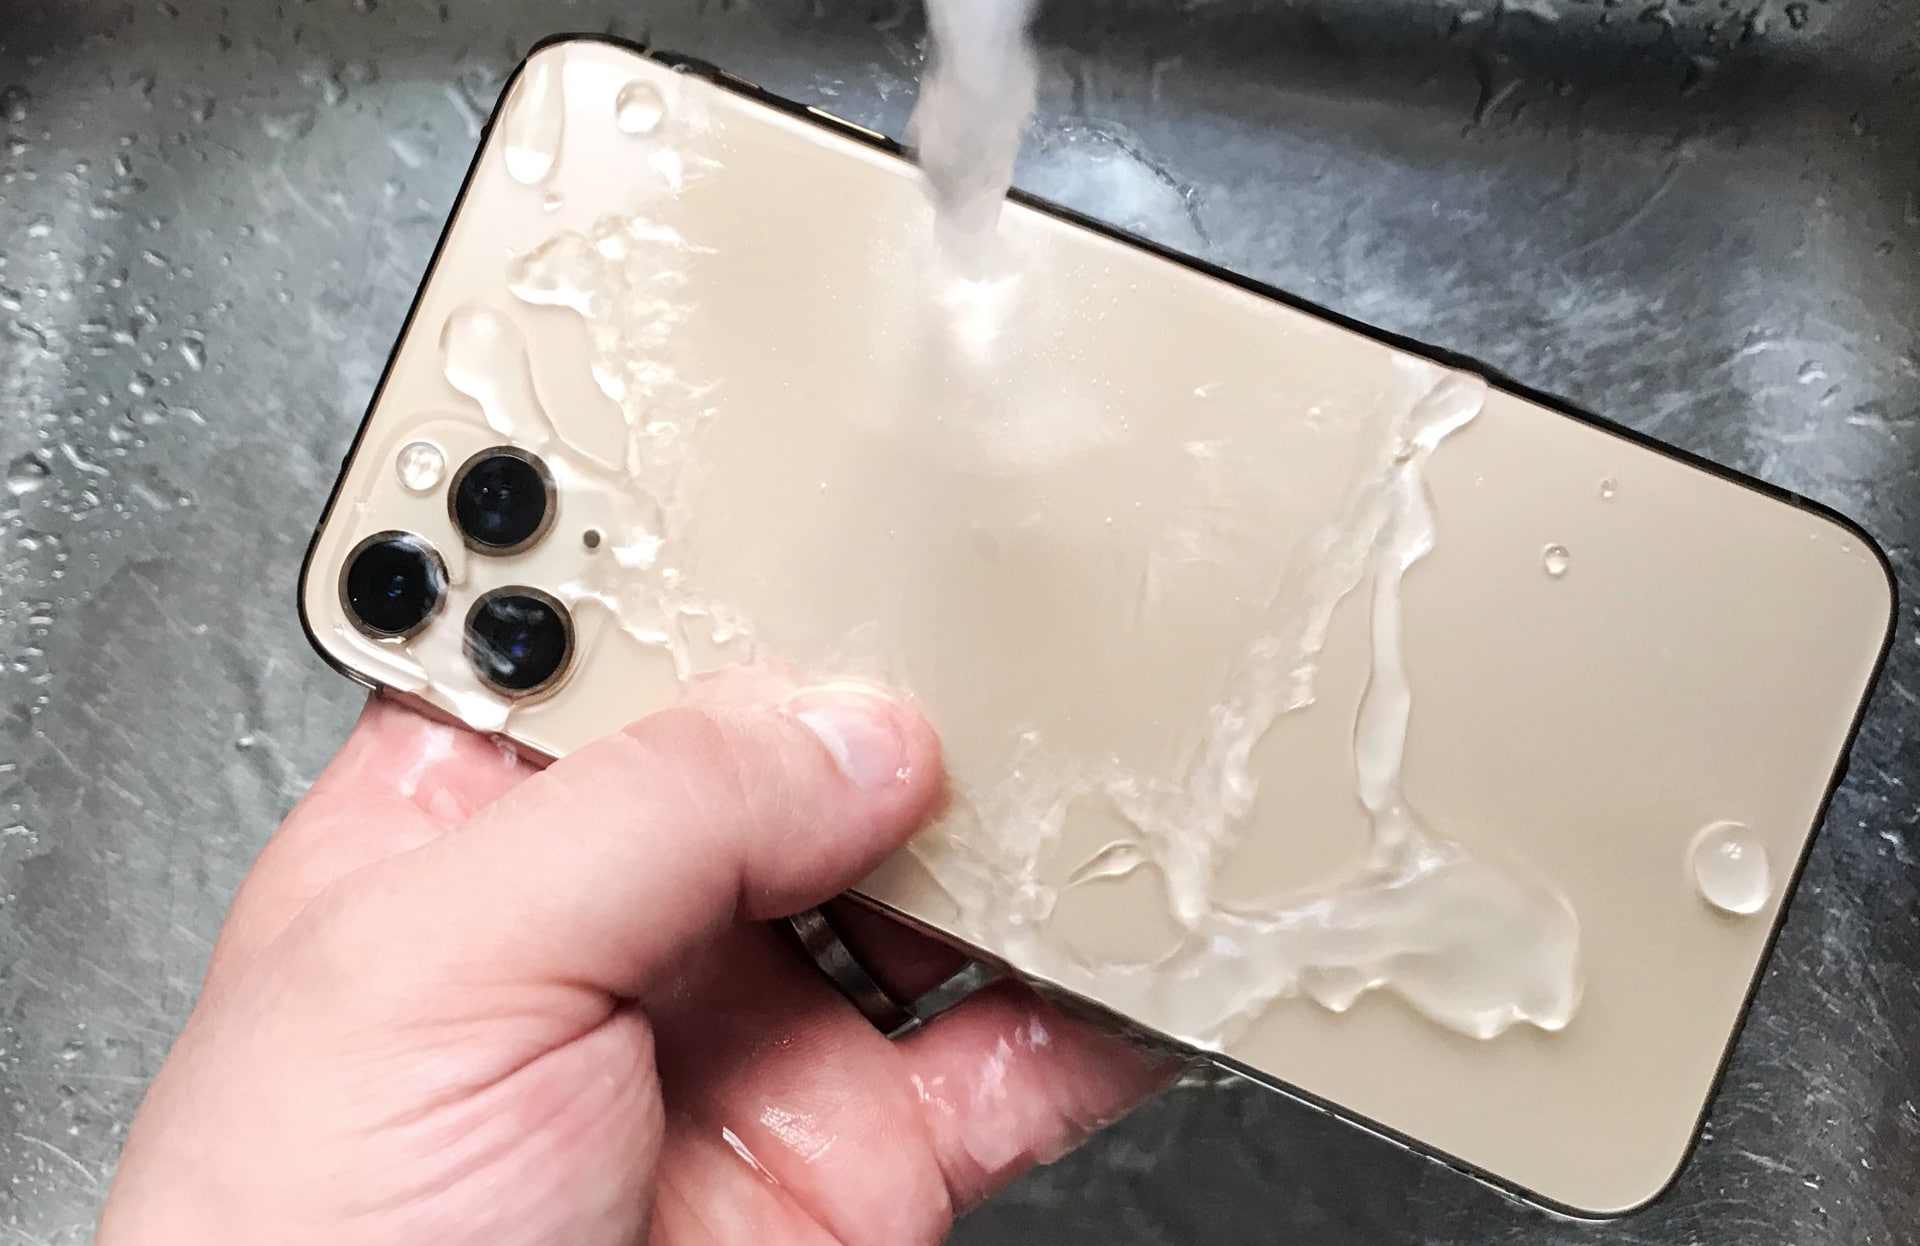 Washing an iPhone 11 Pro Max under a tap